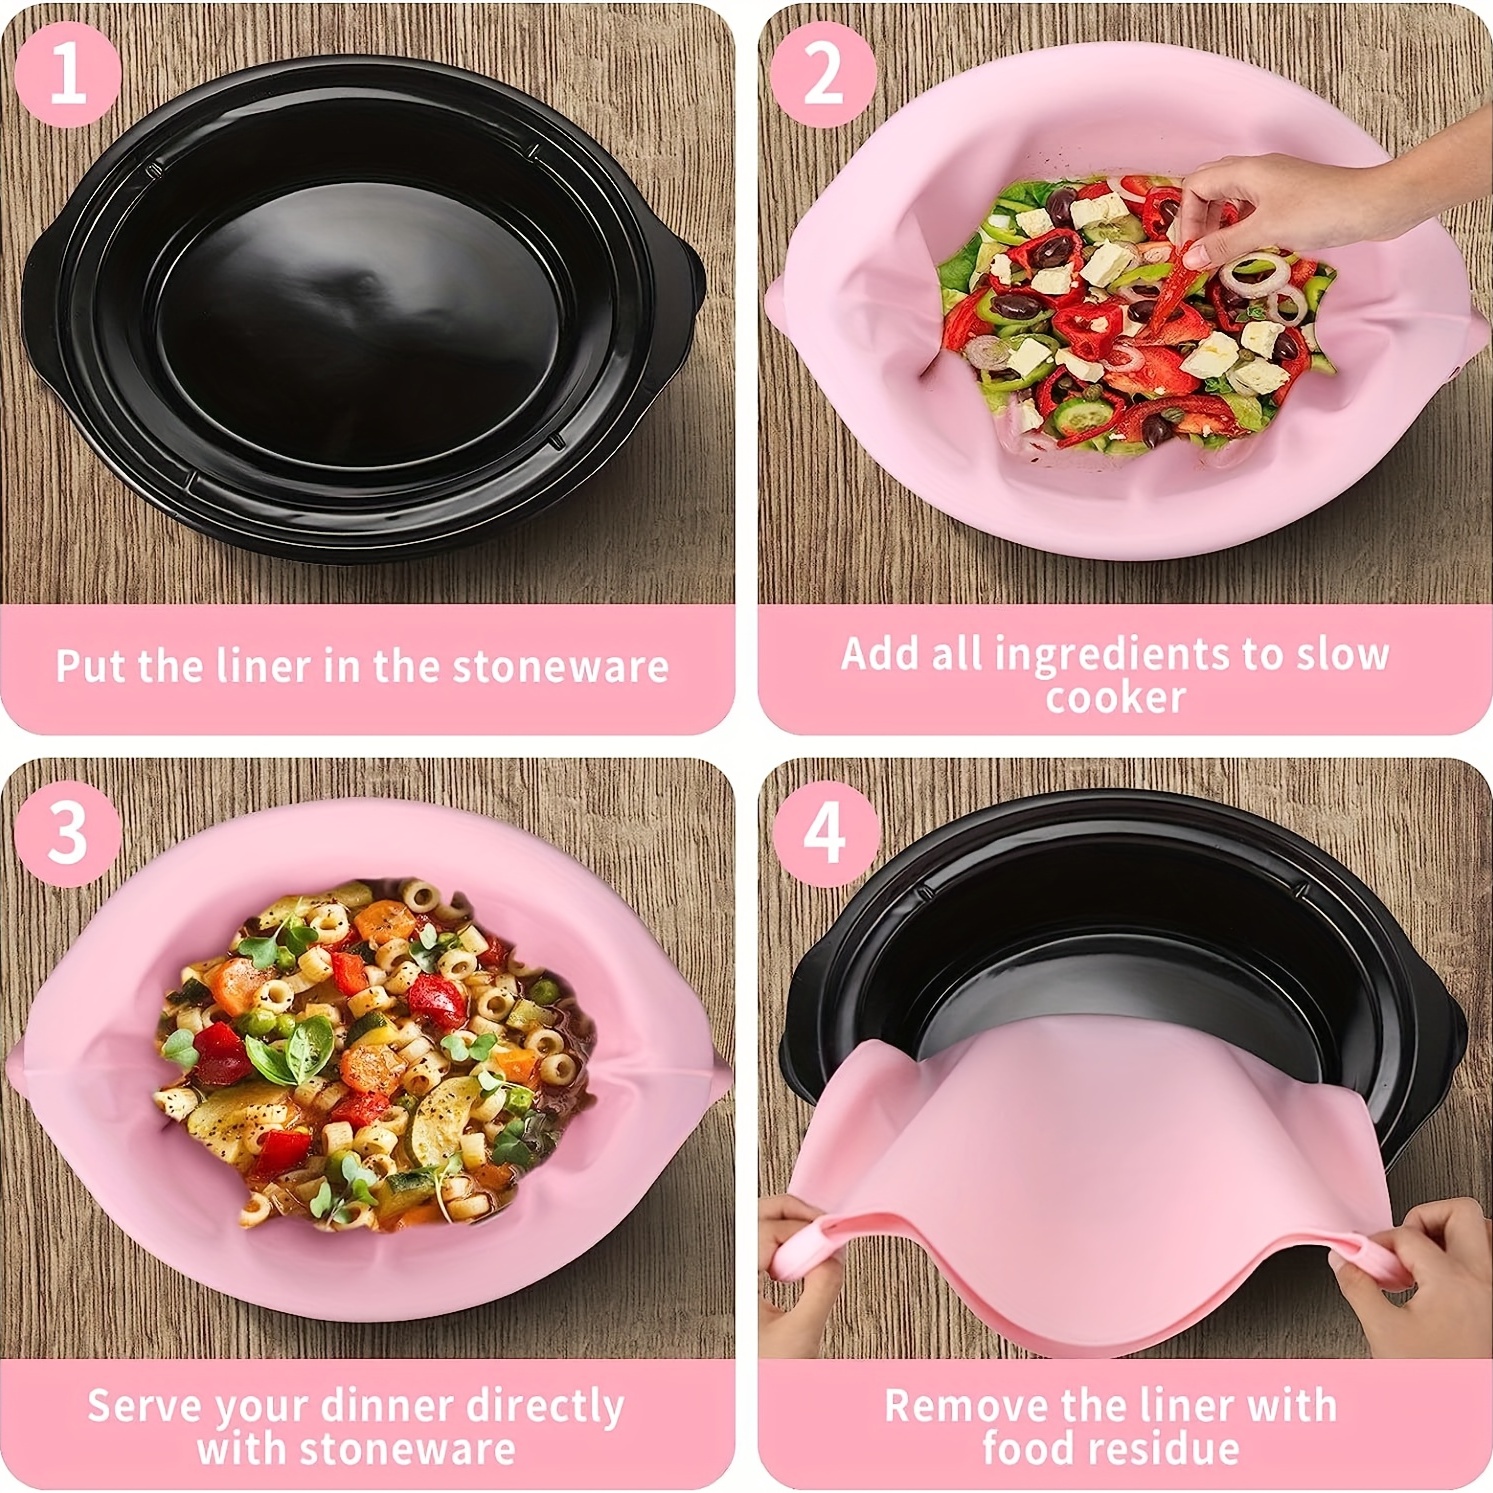 Silicone Slow Cooker Liners, Reusable Cooking Liner For 6-8 Quarts